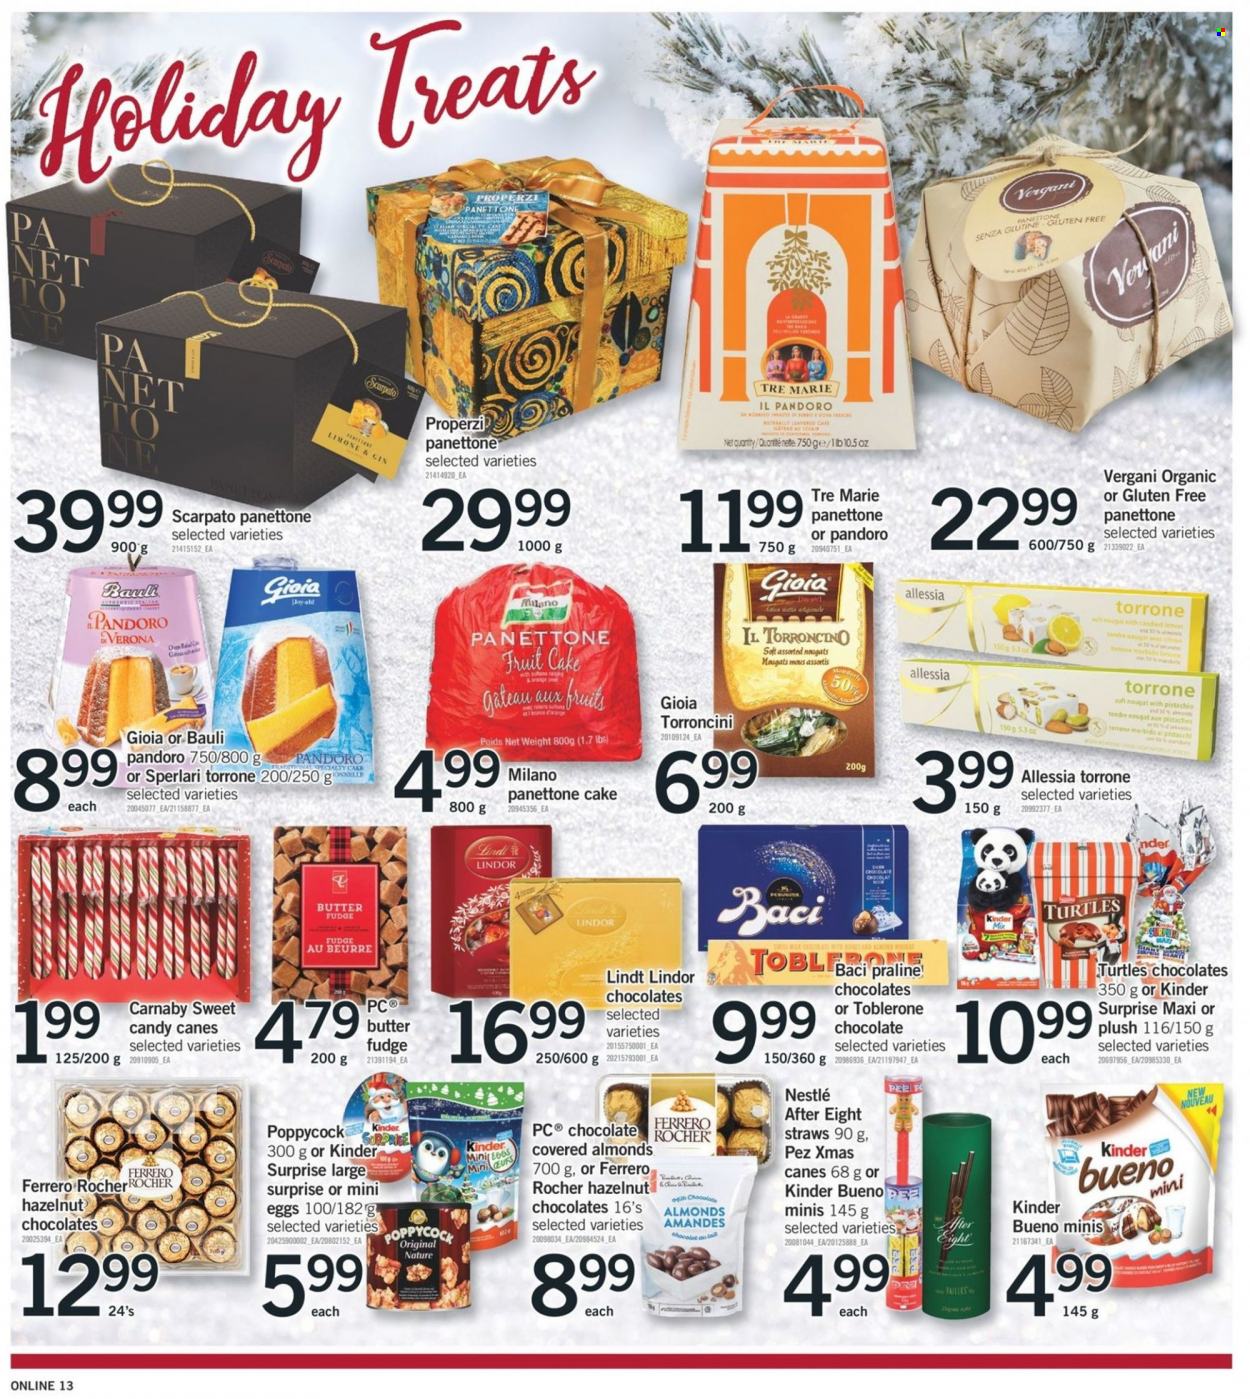 thumbnail - Fortinos Flyer - November 25, 2021 - December 01, 2021 - Sales products - cake, panettone, butter, fudge, chocolate, Kinder Surprise, Kinder Bueno, Toblerone, After Eight, almonds, gin, straw, turtles, Nestlé, Lindt, Lindor, Ferrero Rocher, nougat, oranges. Page 14.